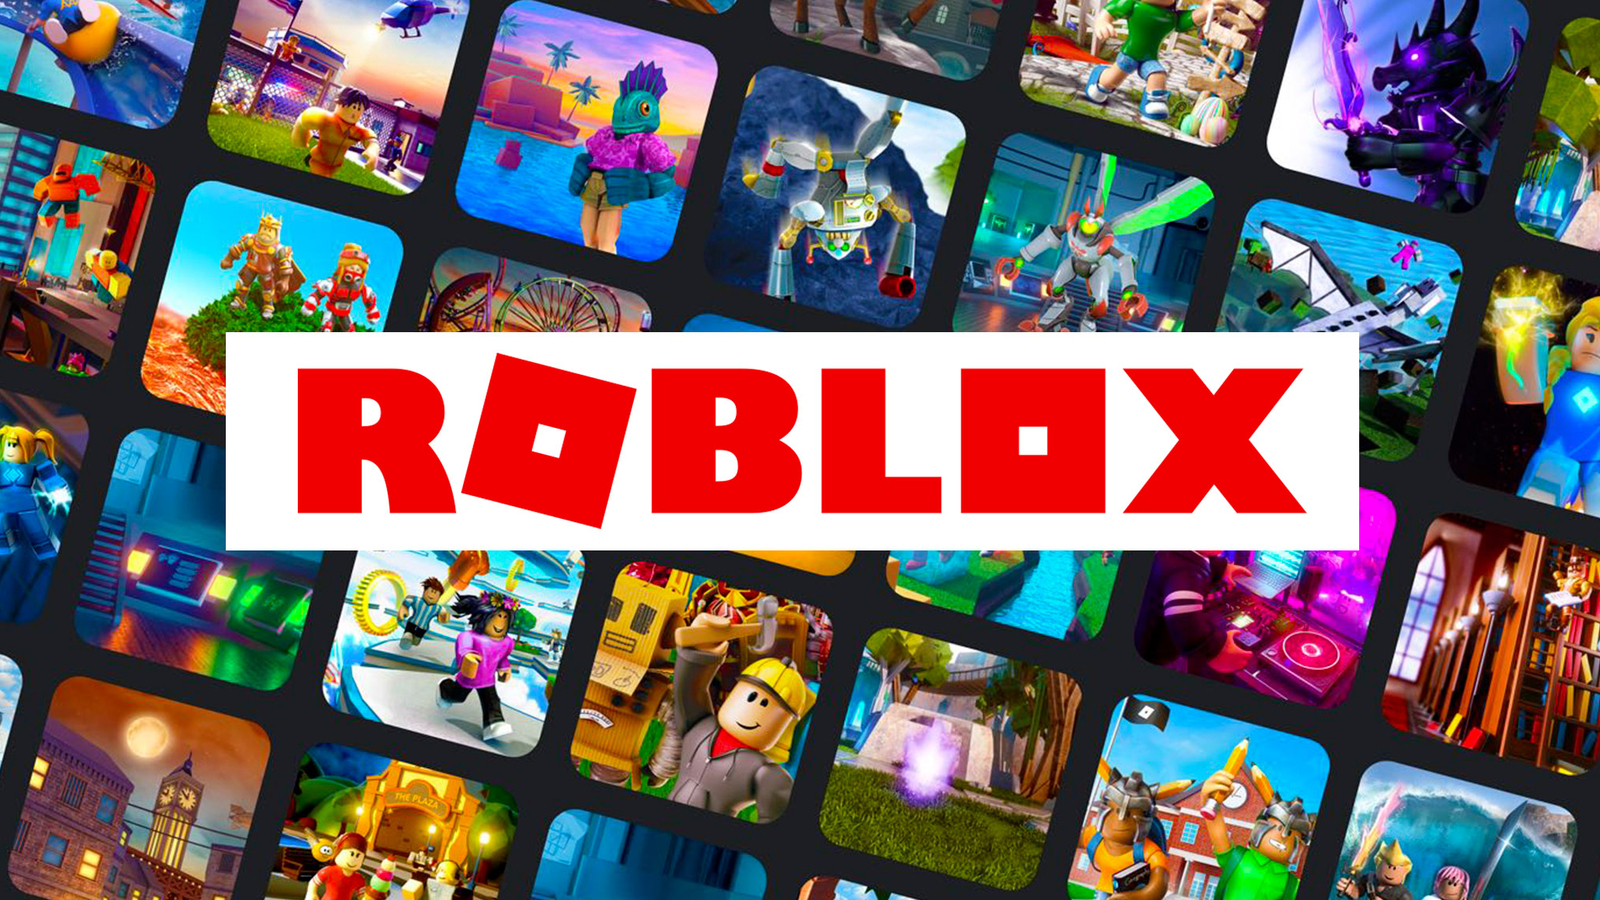 2023 Buy Roblox Stock grown can 